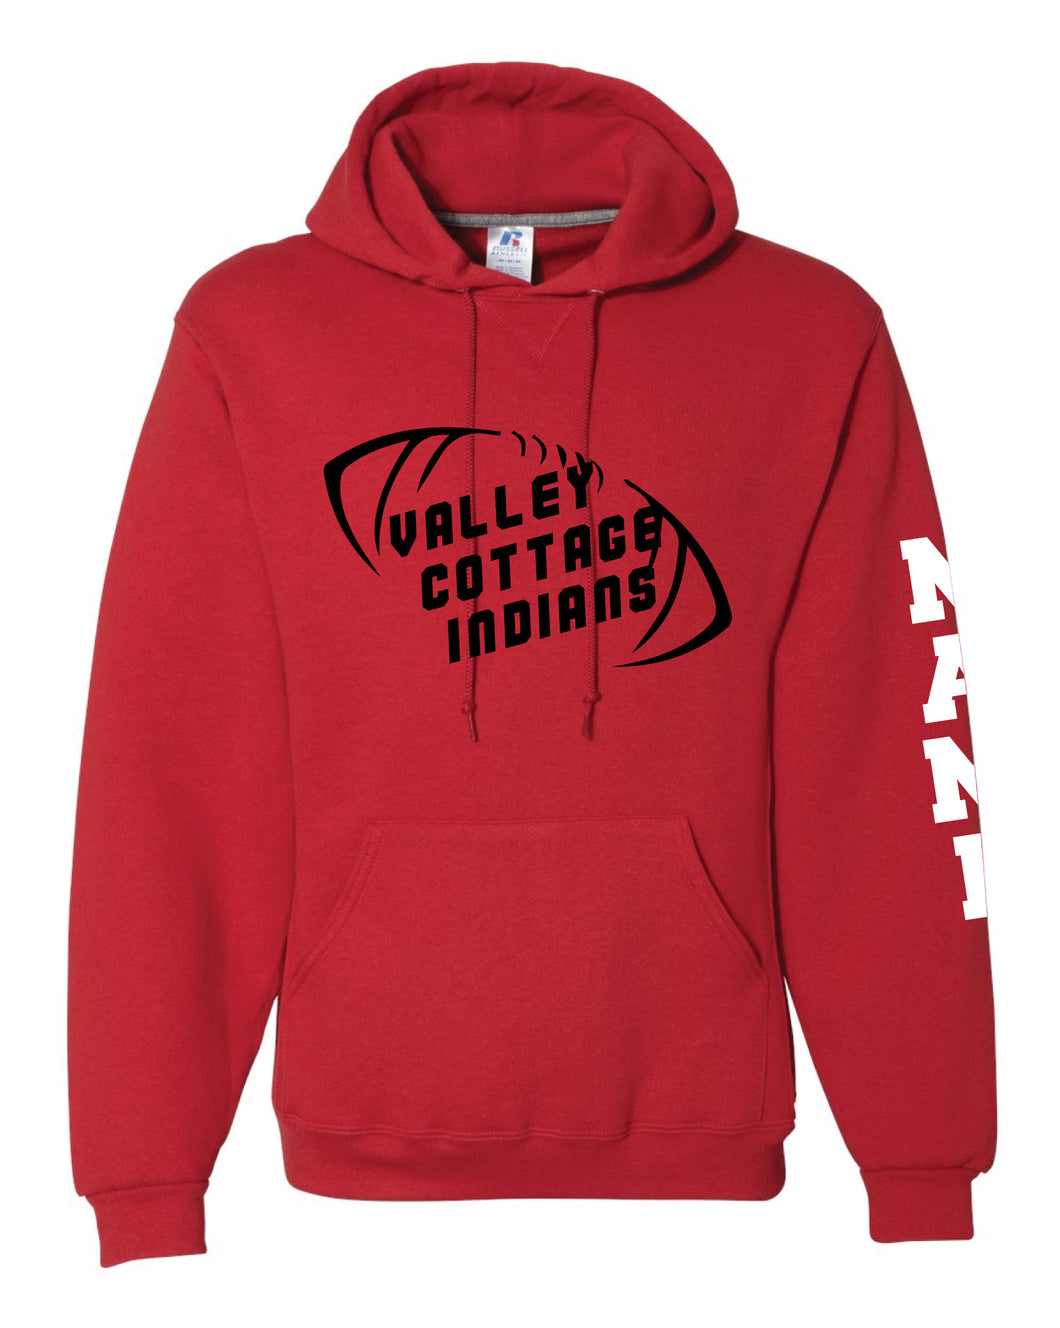 VCI Youth Football Russell Athletic Cotton Hoodie - Red - 5KounT2018